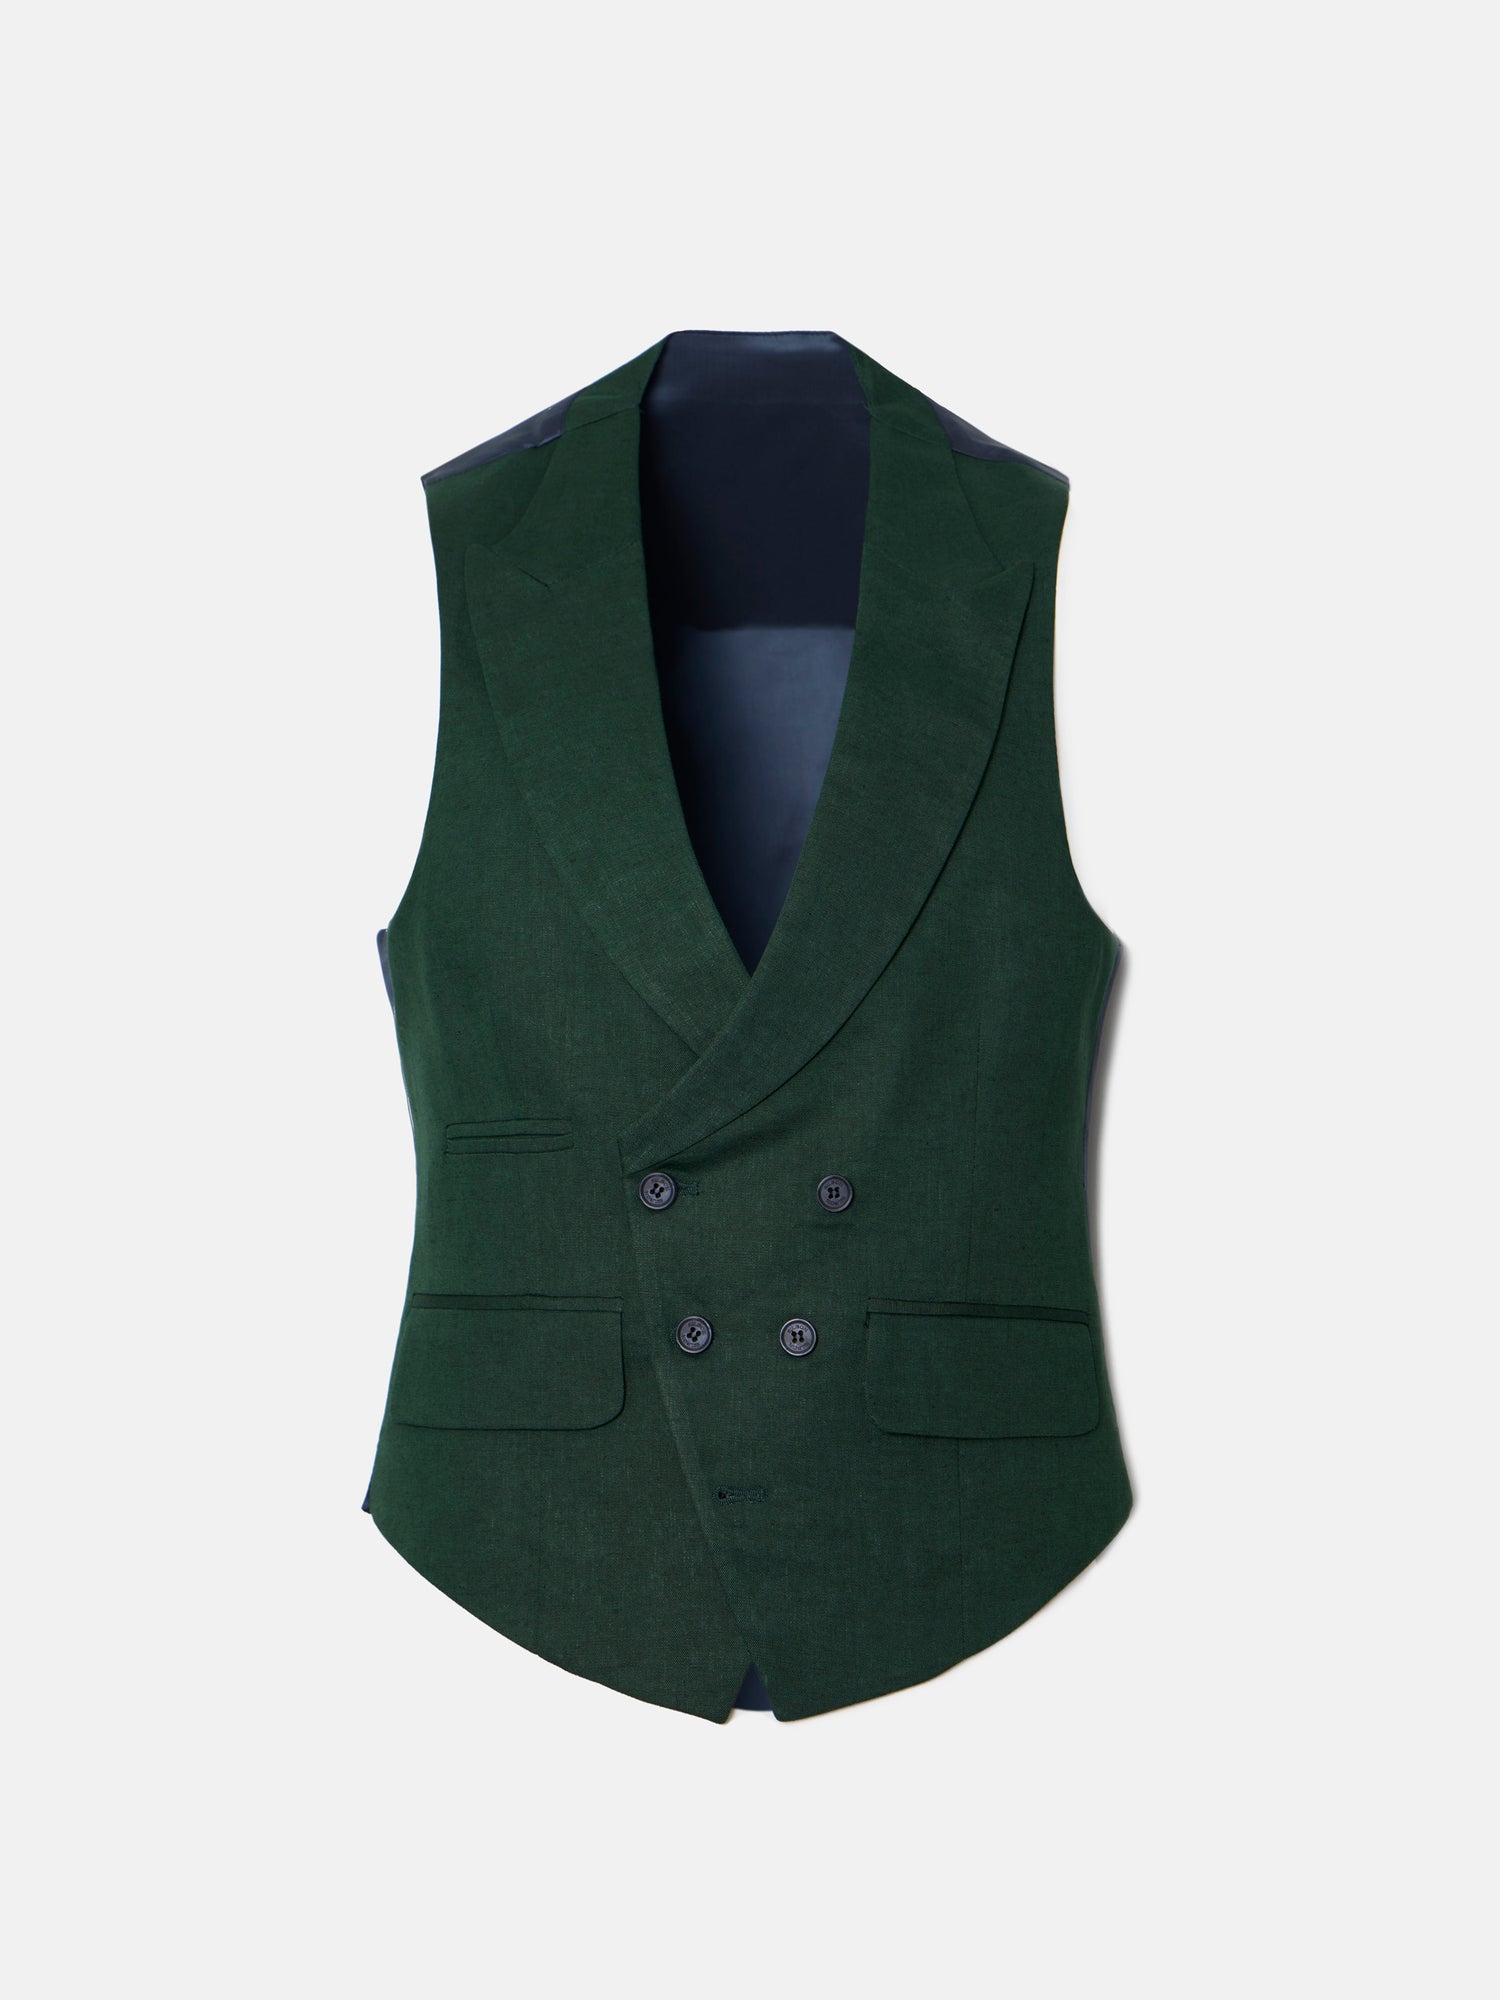 Chaleco chaque tailoring verde oscuro